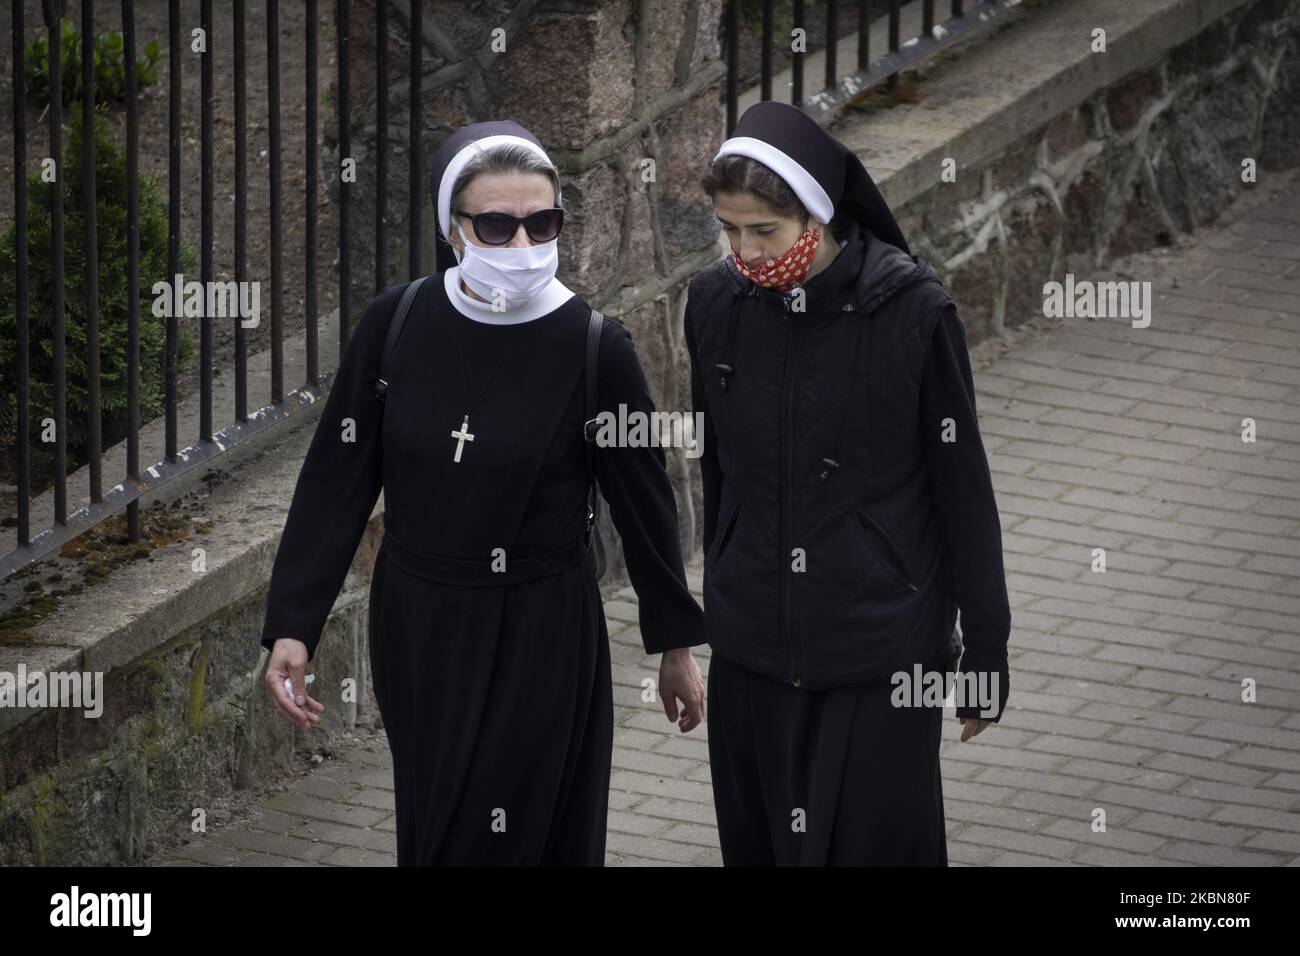 Nuns with face masks are seen in Warsaw, Poland on April 29, 2020. The Polish government has announced it will allow the opening of shopping malls on May 4 and pre-schools on May 6 less than two weeks ahead of scheduled persidential elections despite strong opposition. (Photo by Jaap Arriens/NurPhoto) Stock Photo